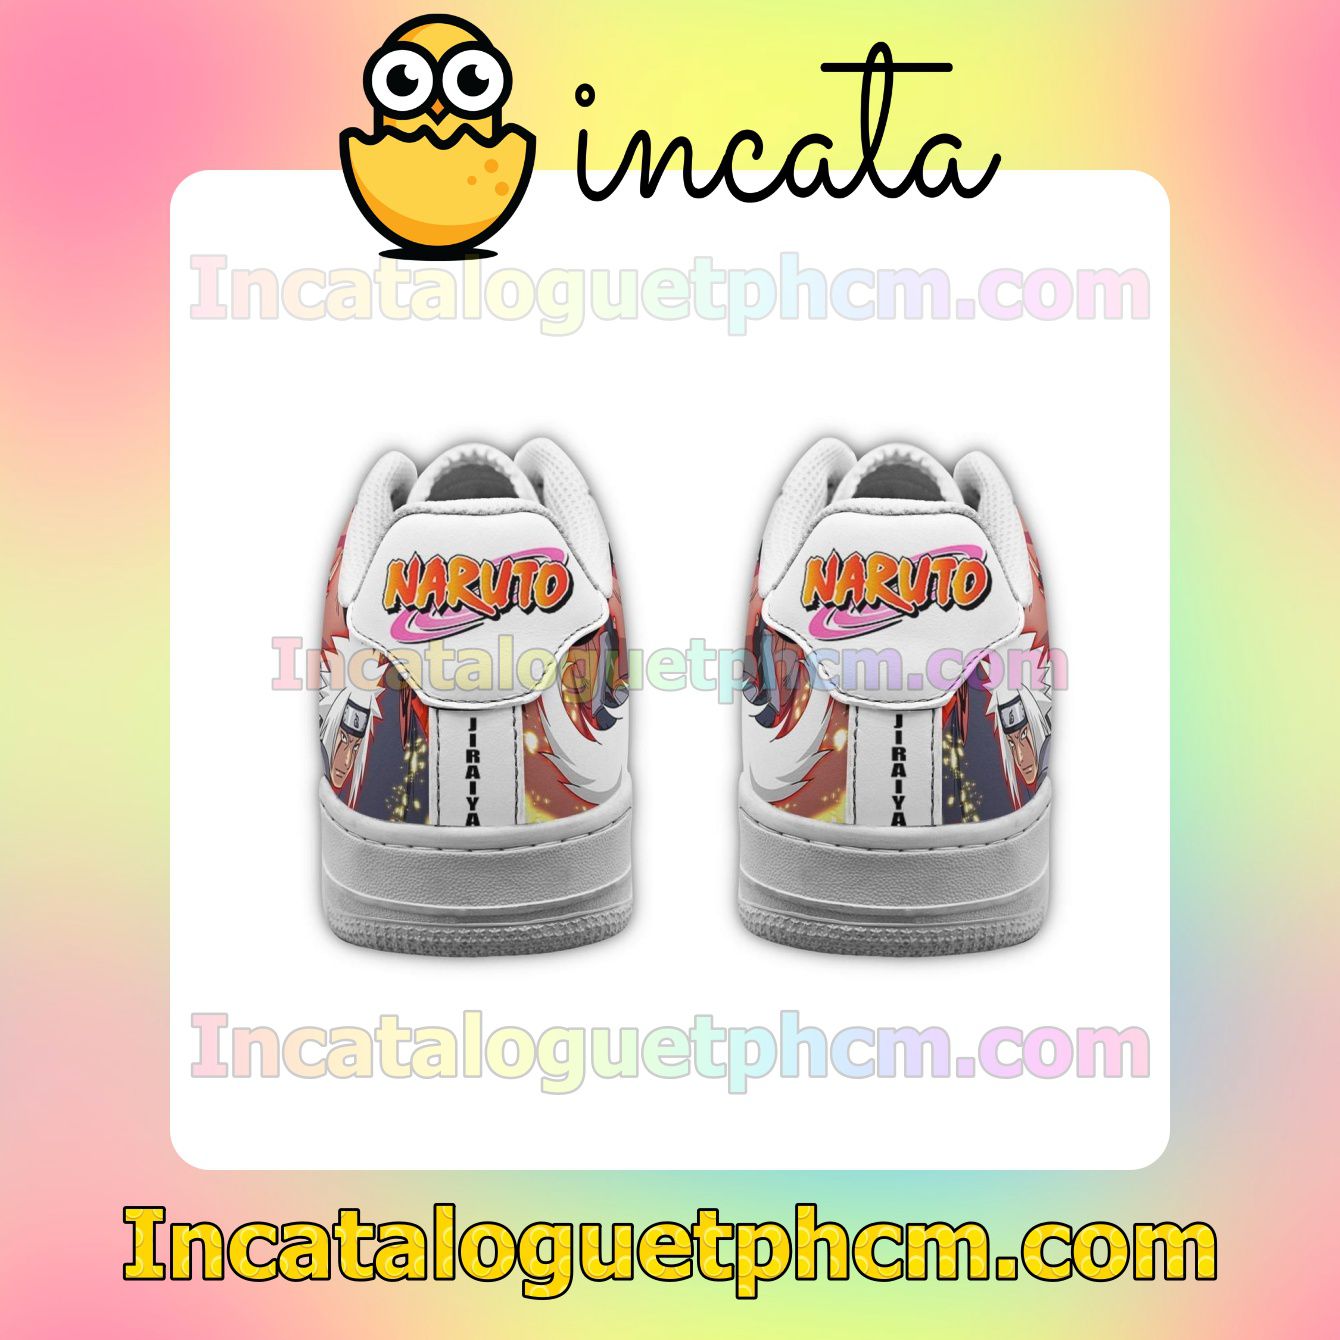 Mother's Day Gift Jiraiya Naruto Anime Nike Low Shoes Sneakers